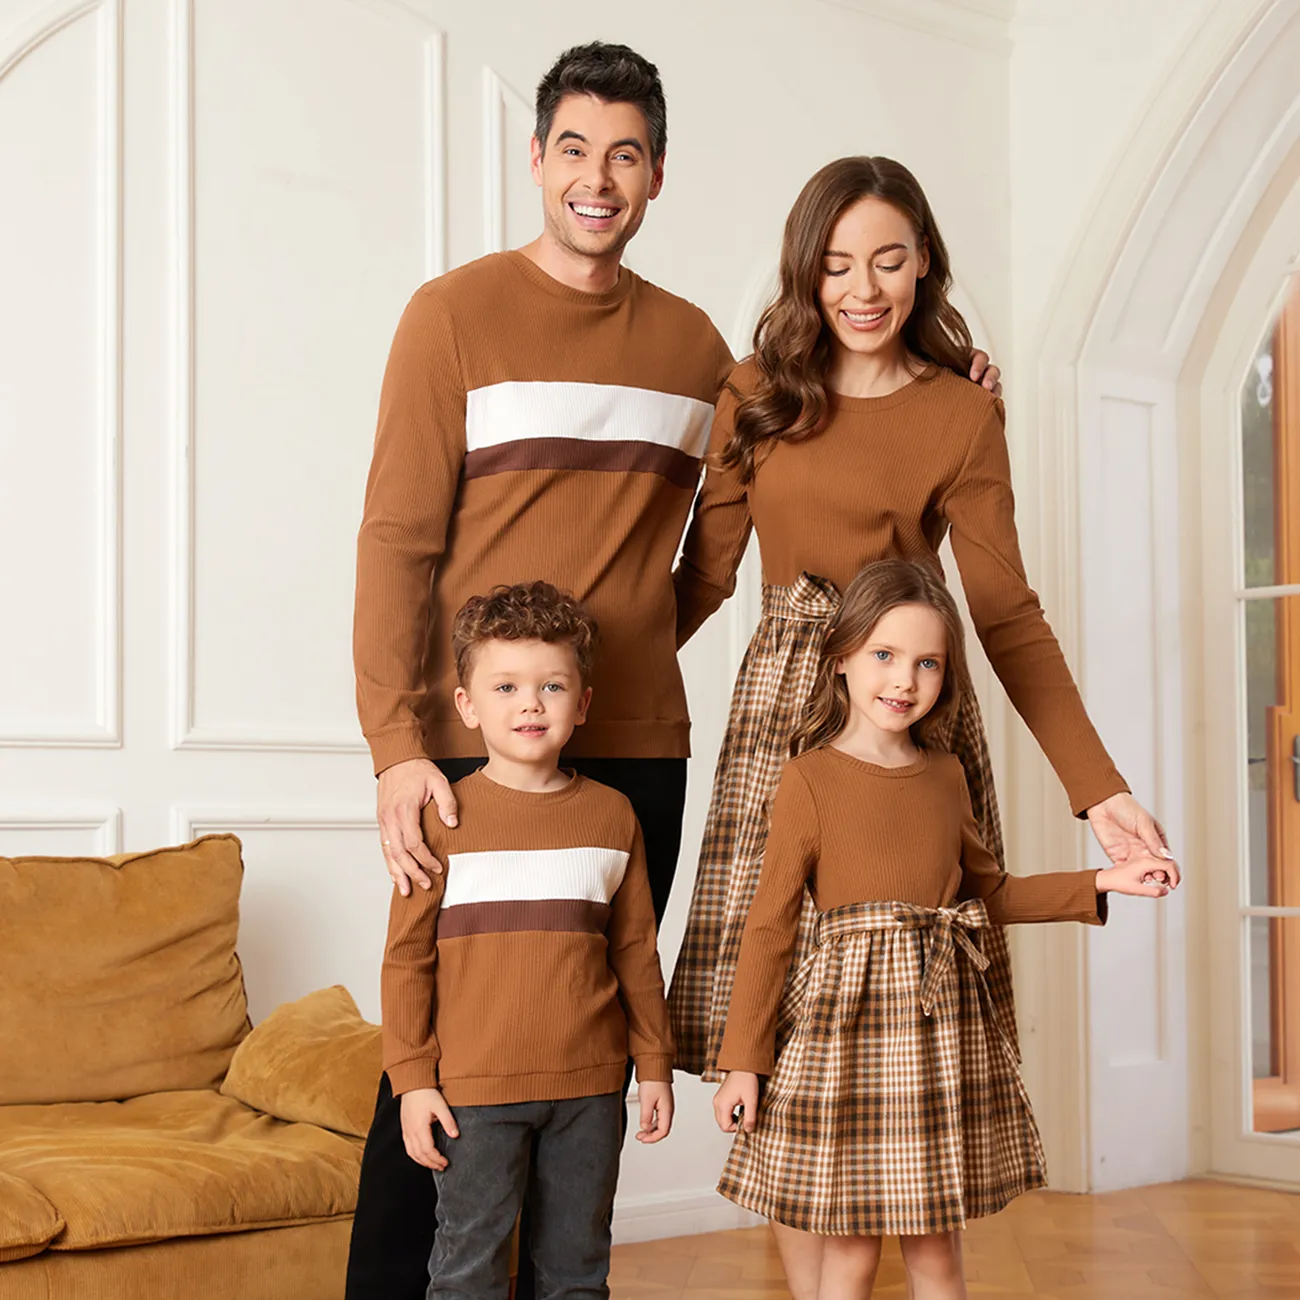 Family Matching Coffee Ribbed Spliced Plaid Belted Dresses and Long-sleeve Colorblock Tops Set Coffee big image 1